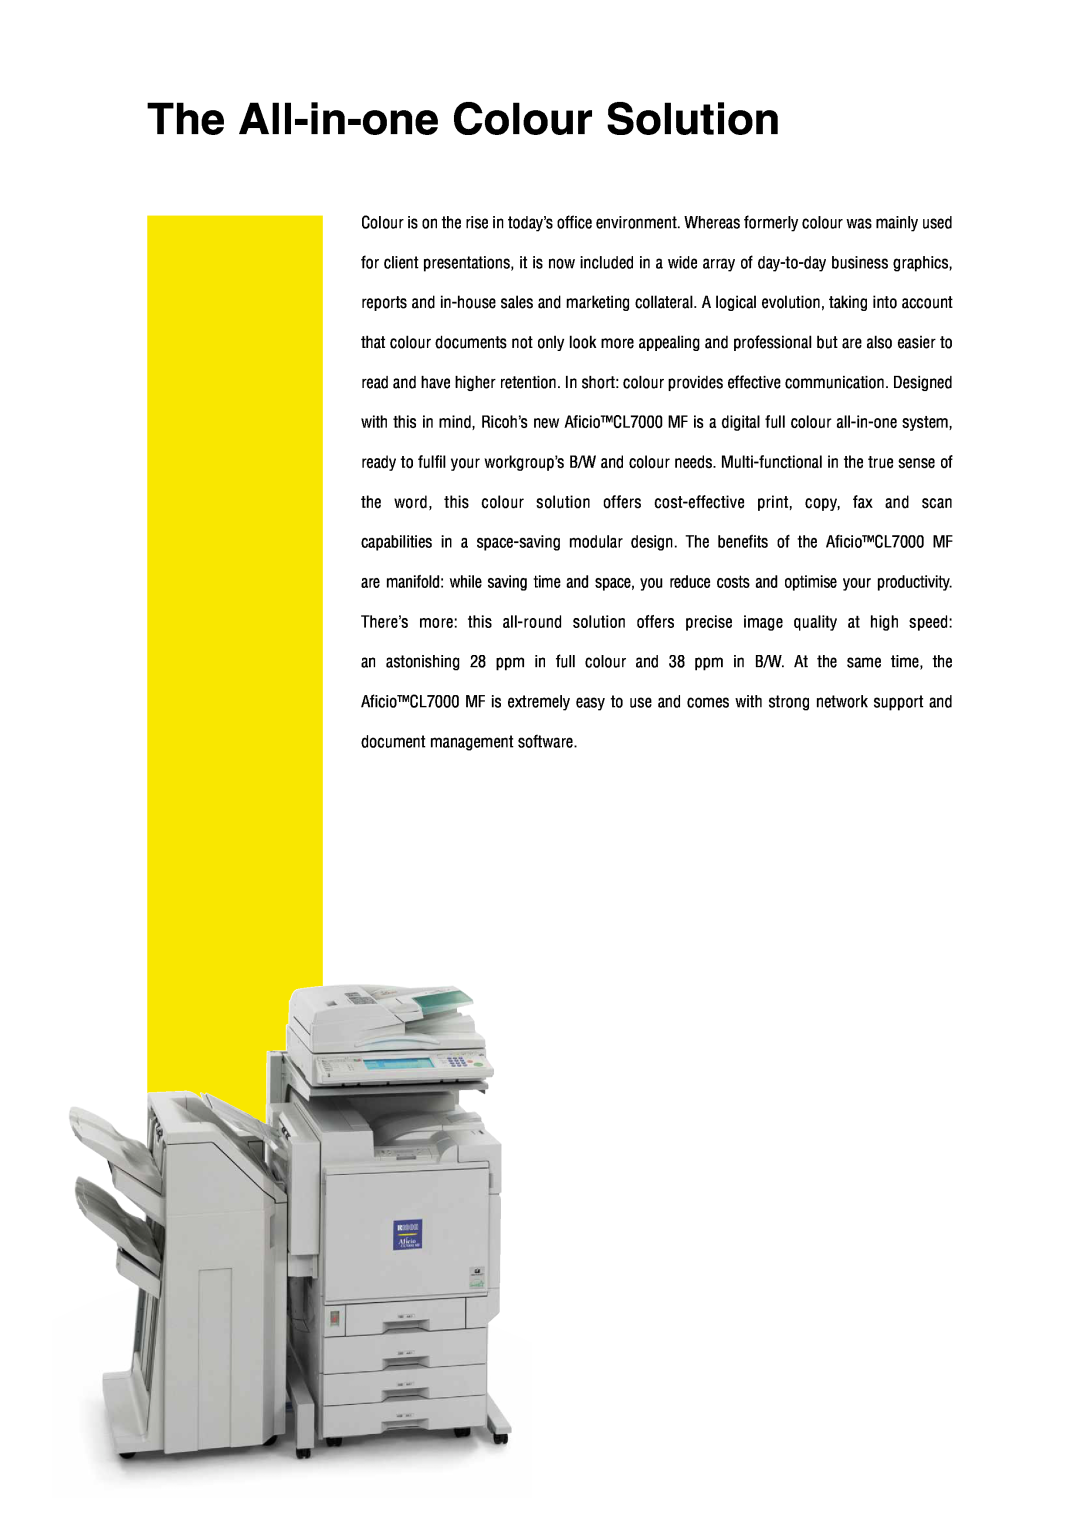 Ricoh CL7000 MF manual The All-in-one Colour Solution 